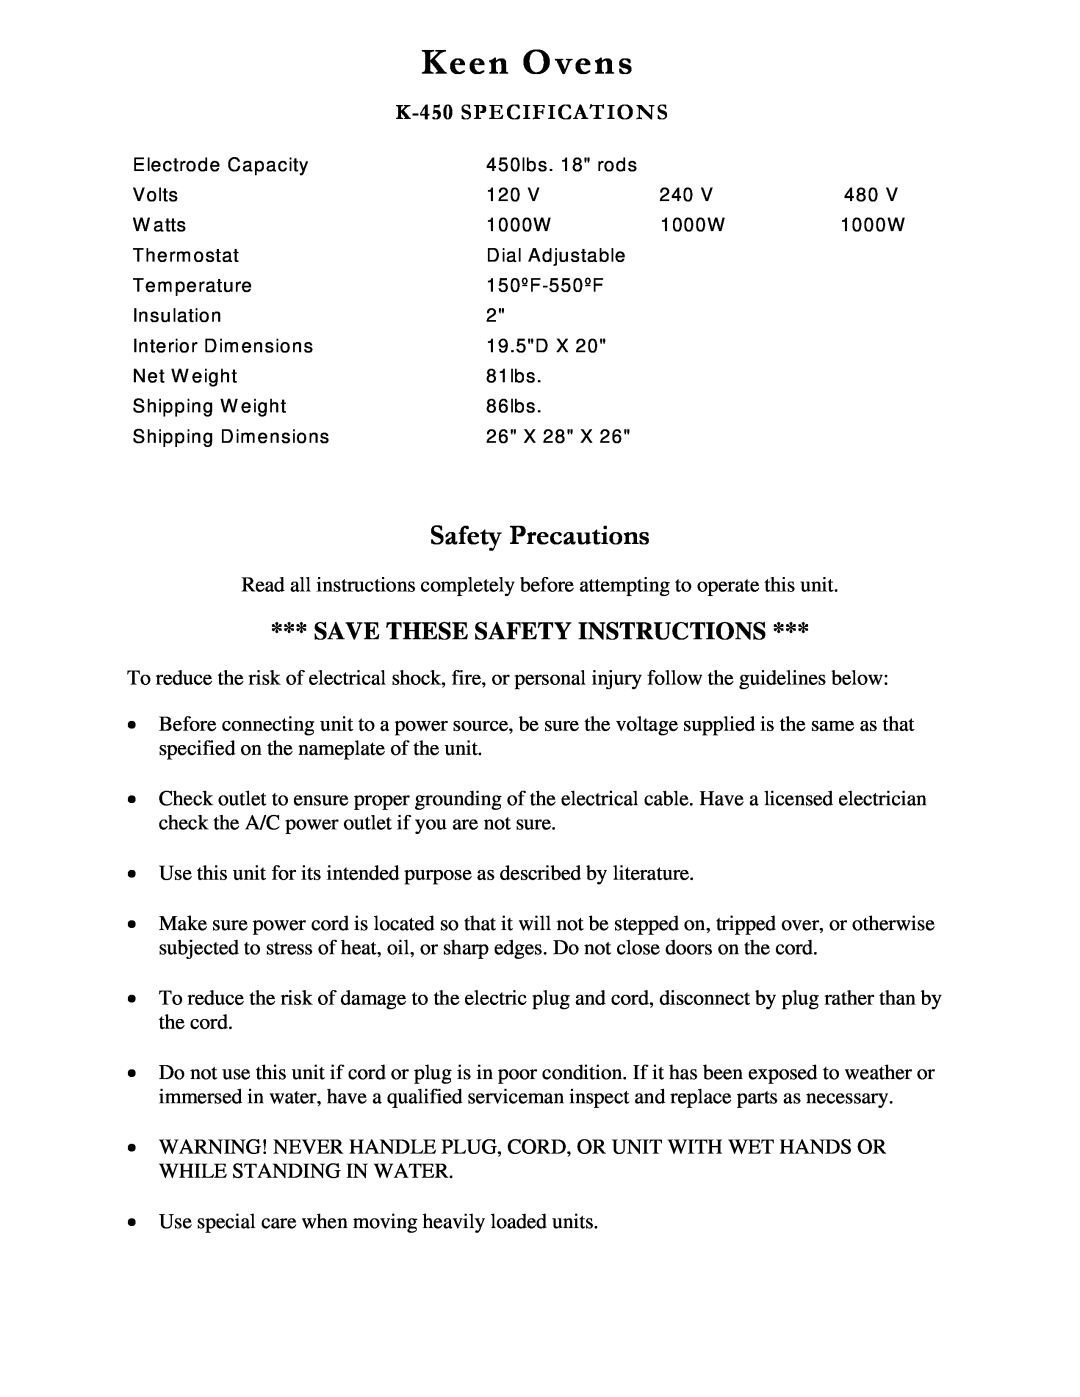 Henkel manual Safety Precautions, Save These Safety Instructions, Keen Ovens, K-450SPECIFICATIONS 